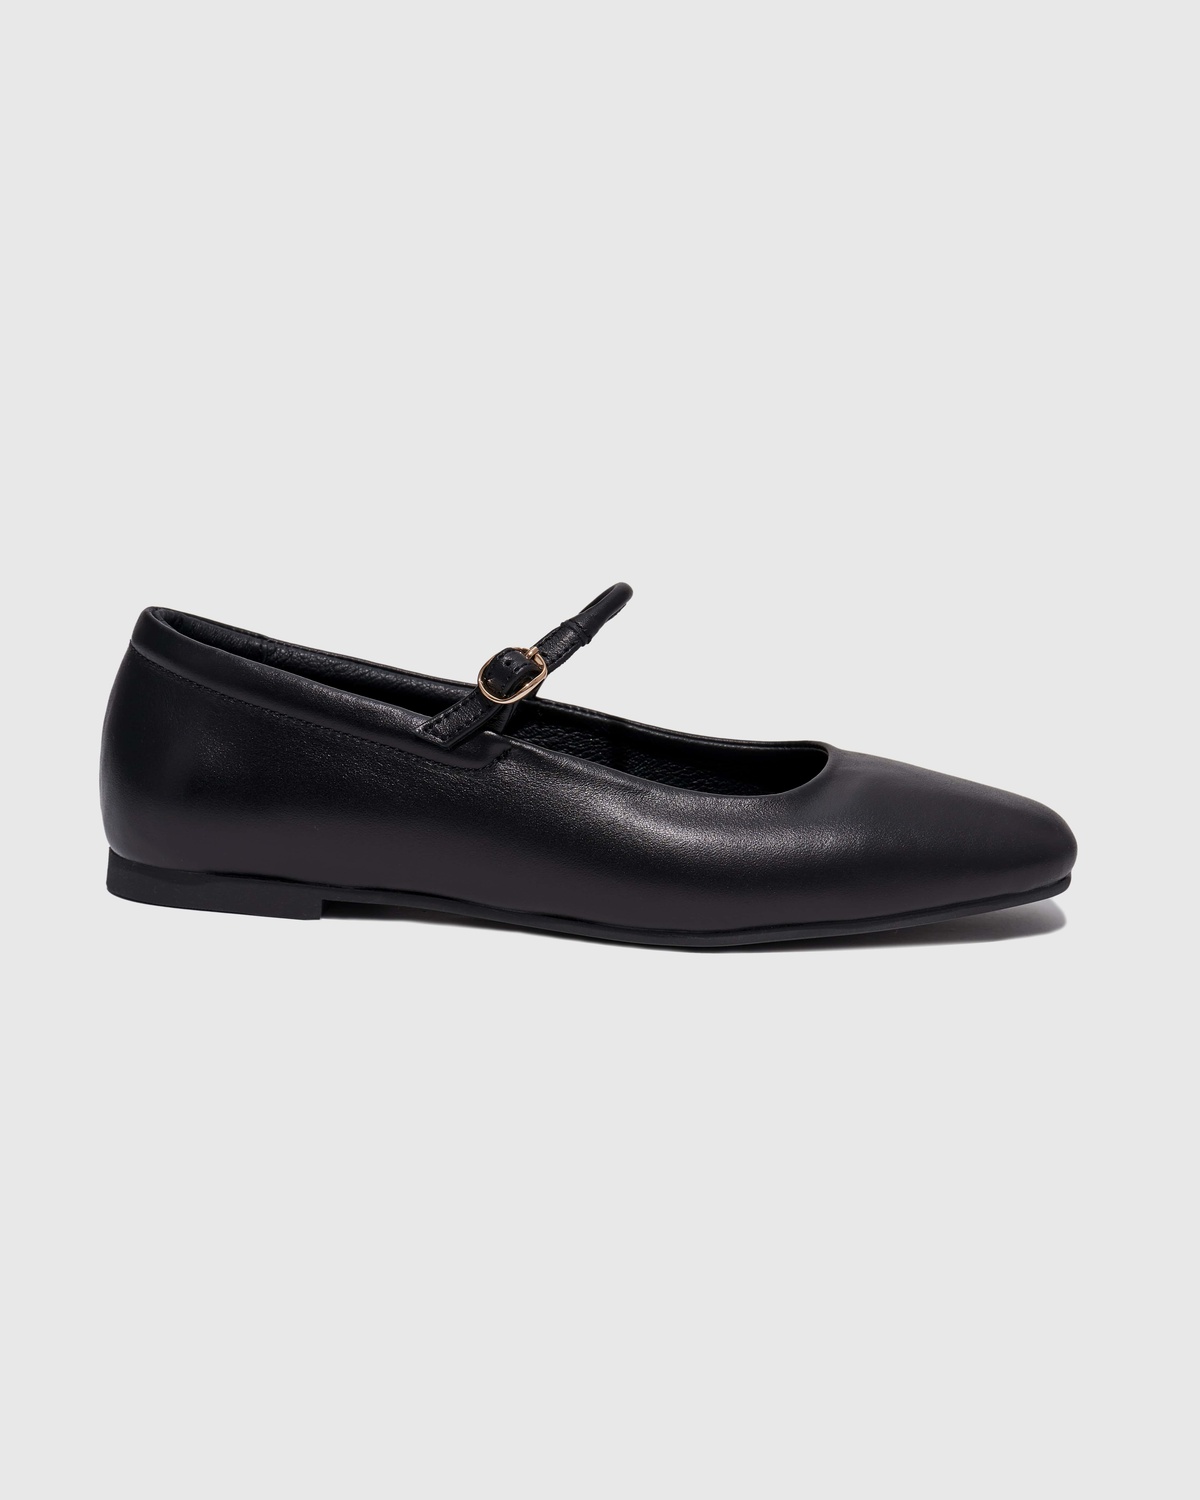 MARY JANE Leather Ballet Flats 